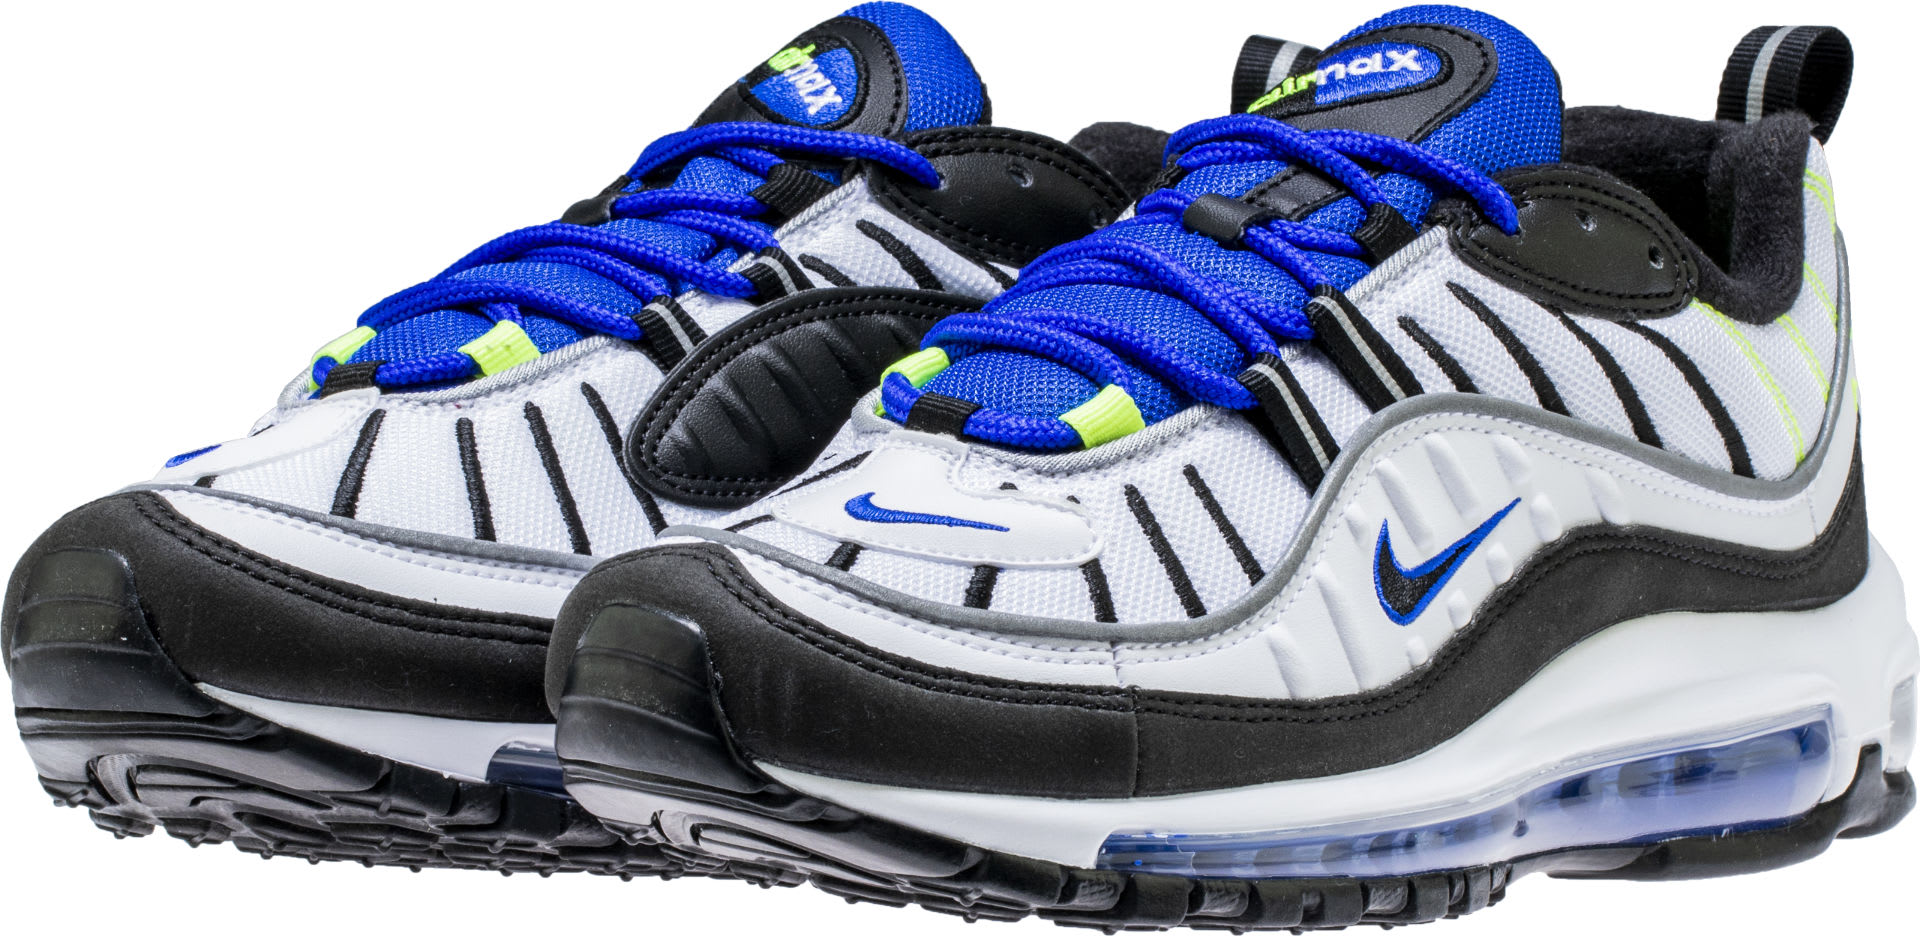 Nike Air Max 98 White Black Racer Blue Volt Release Date 640744-103 Front